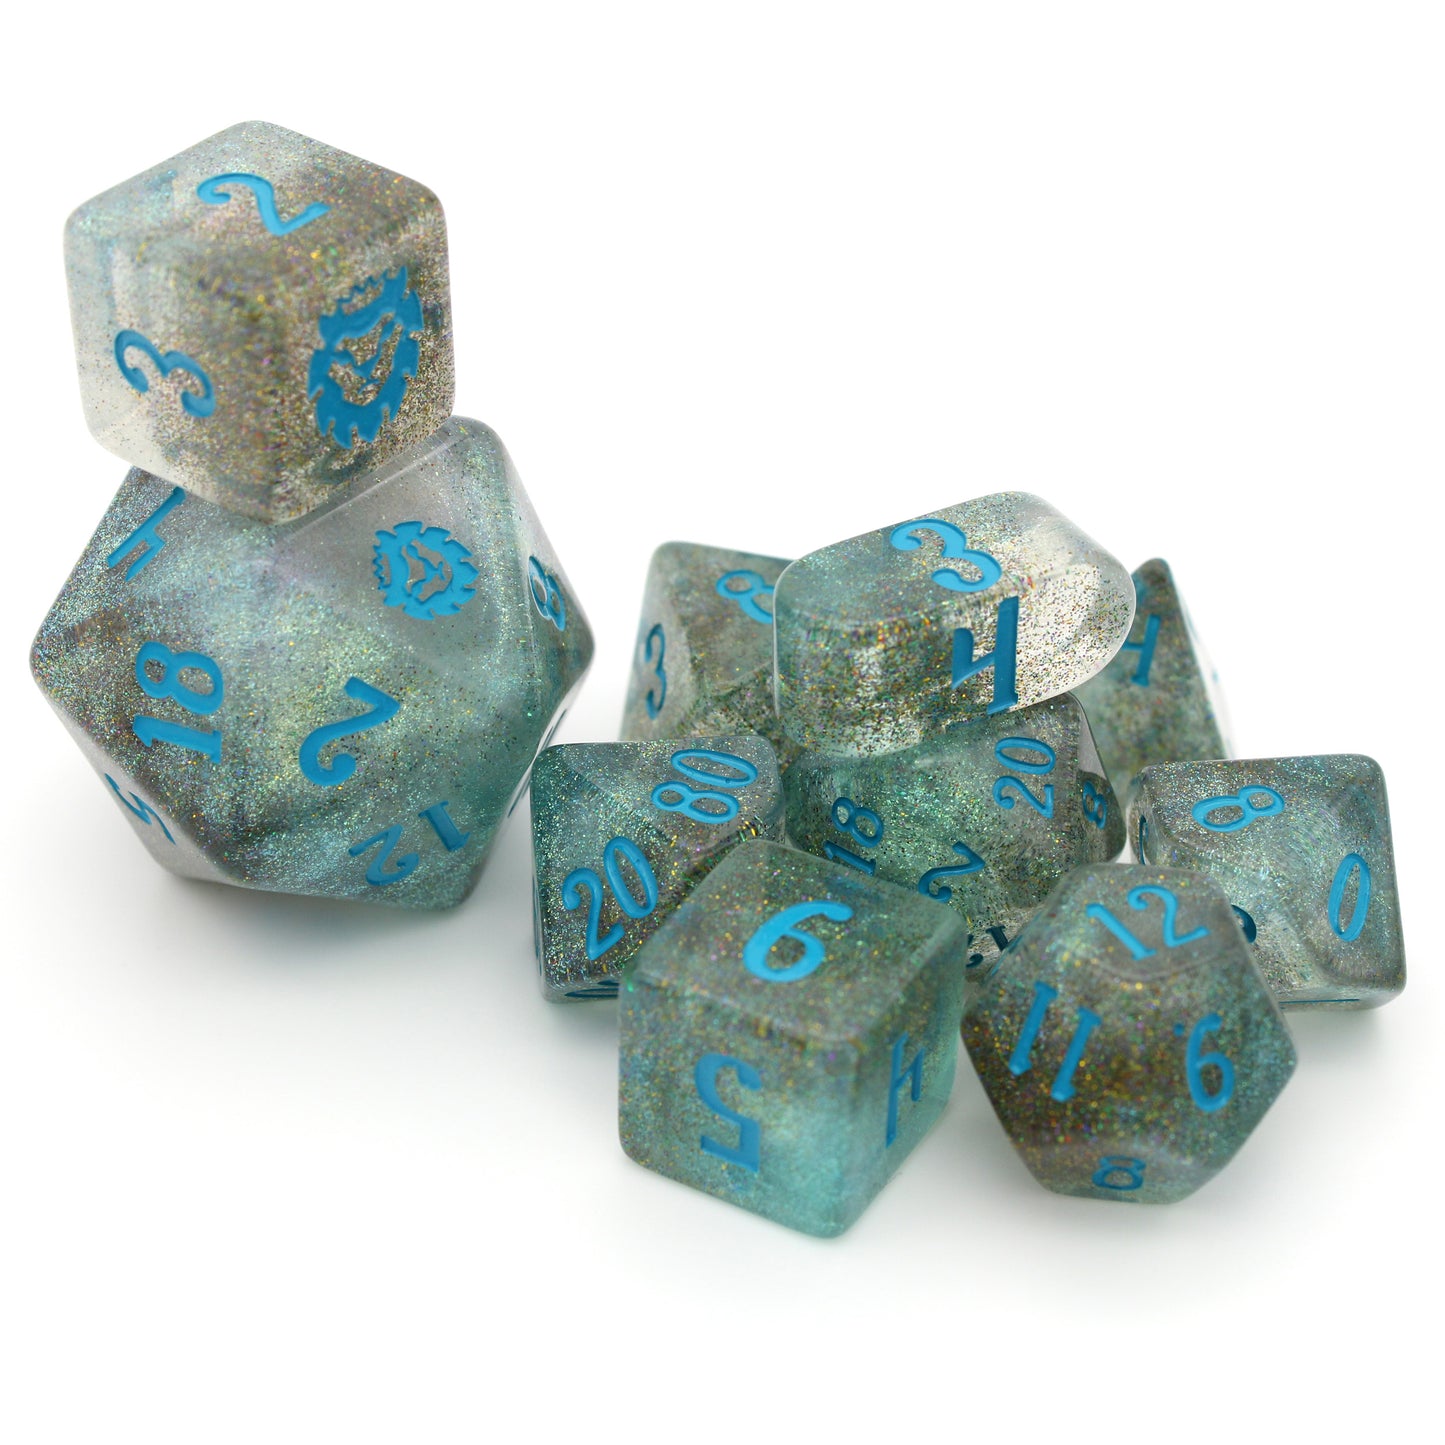 River Magic is a 10-piece dice set of swirling blue, brown, and clear resin, shot through with silver glitter and inked in teal.